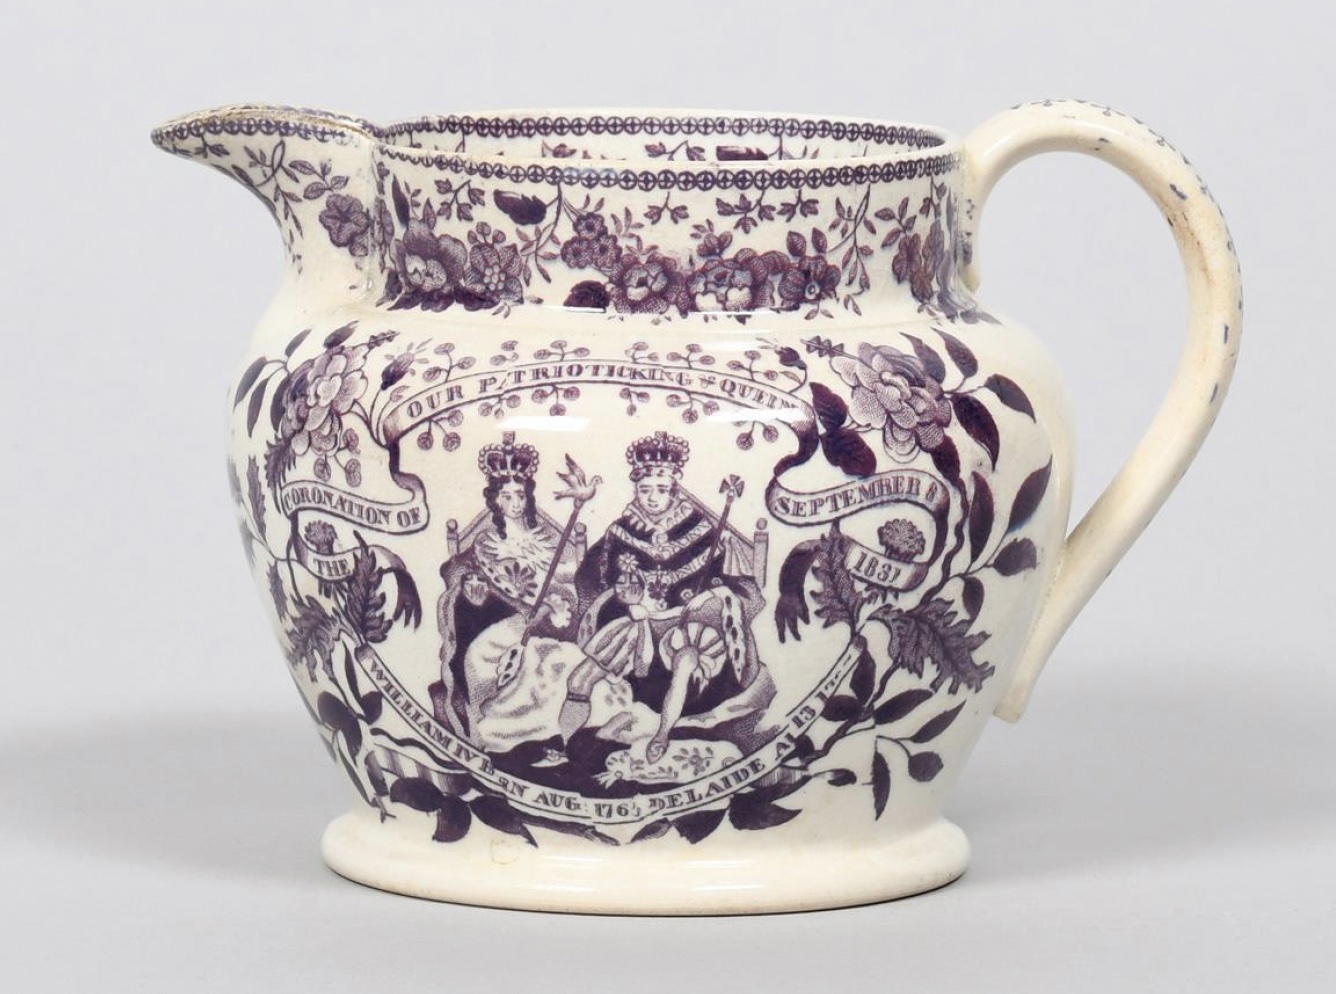 A jug marking the coronation of William IV and Princess Adelaide in 1831